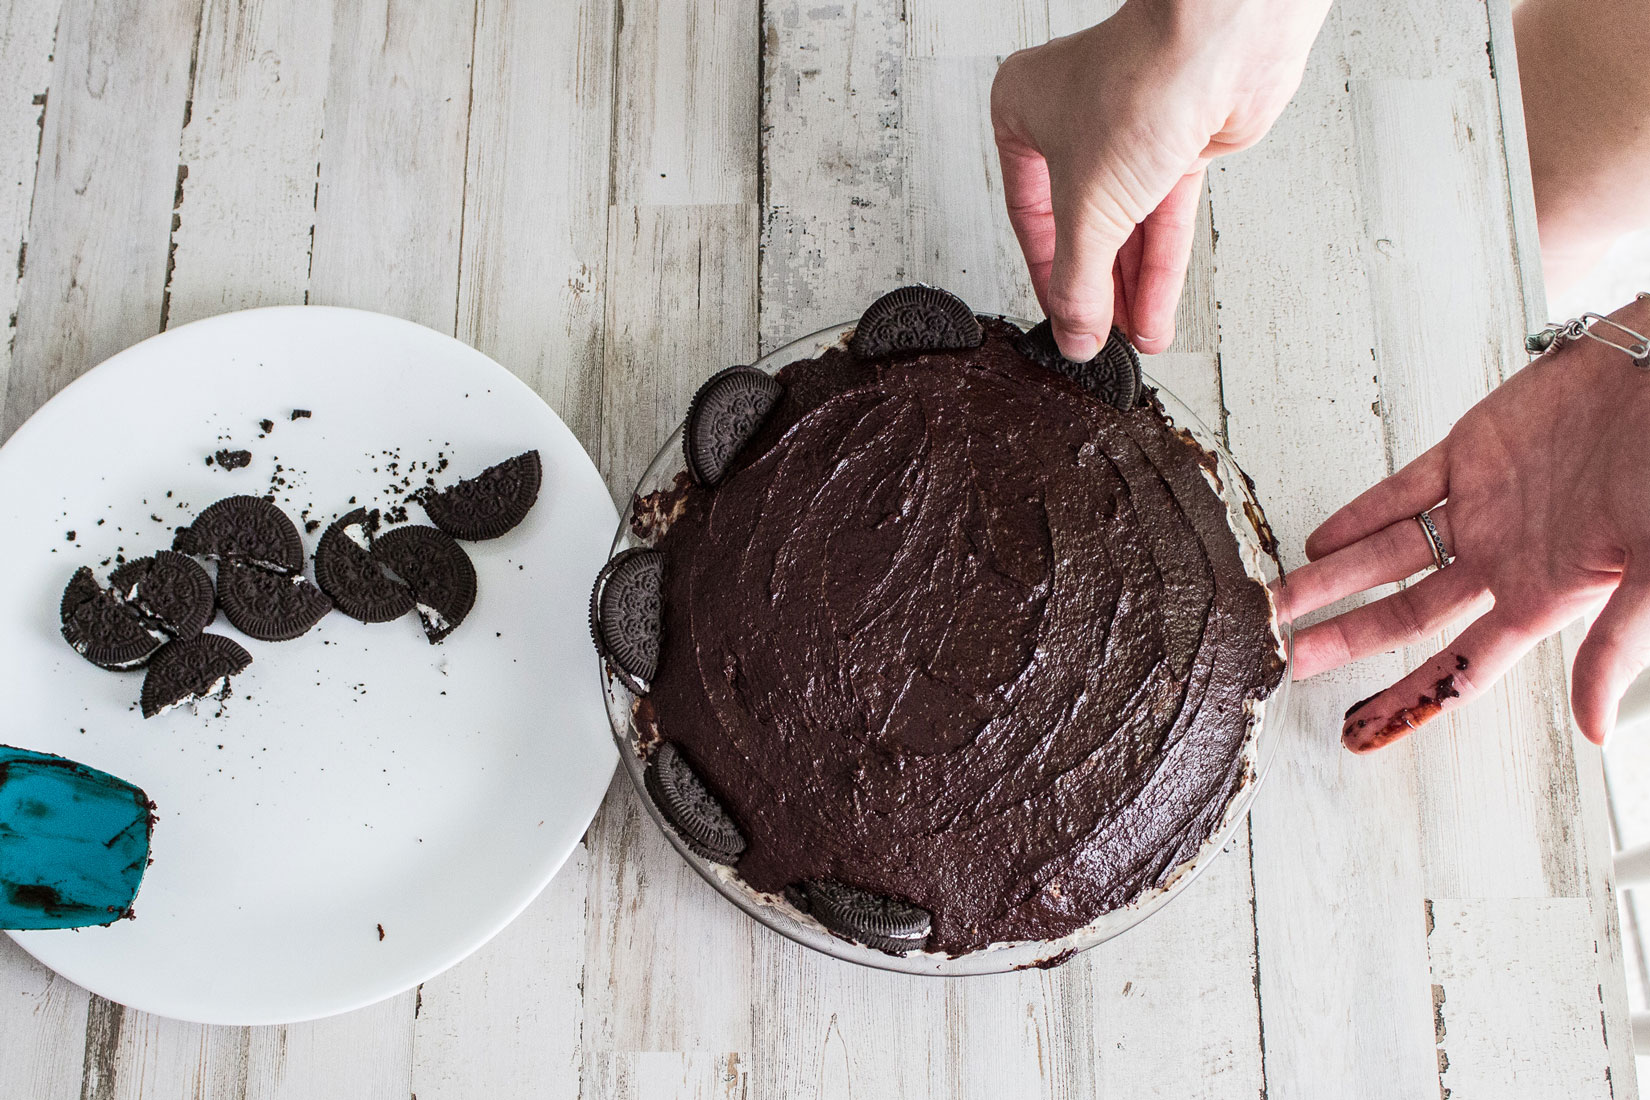 When people tell me that healthy tastes like cardboard and that gluten free surely can’t be fun to eat, I think of this easy gluten-free no-bake Oreo pie and laugh. Because no one will know this no bake dessert is gluten free, and it is most certainly FULL of chocolatey goodness flavor. You don’t even have to pre-heat the oven - just whip this together and you can have it ready for anytime! #glutenfreerecipes #dessertrecipes #nobakerecipes #recipeswaps